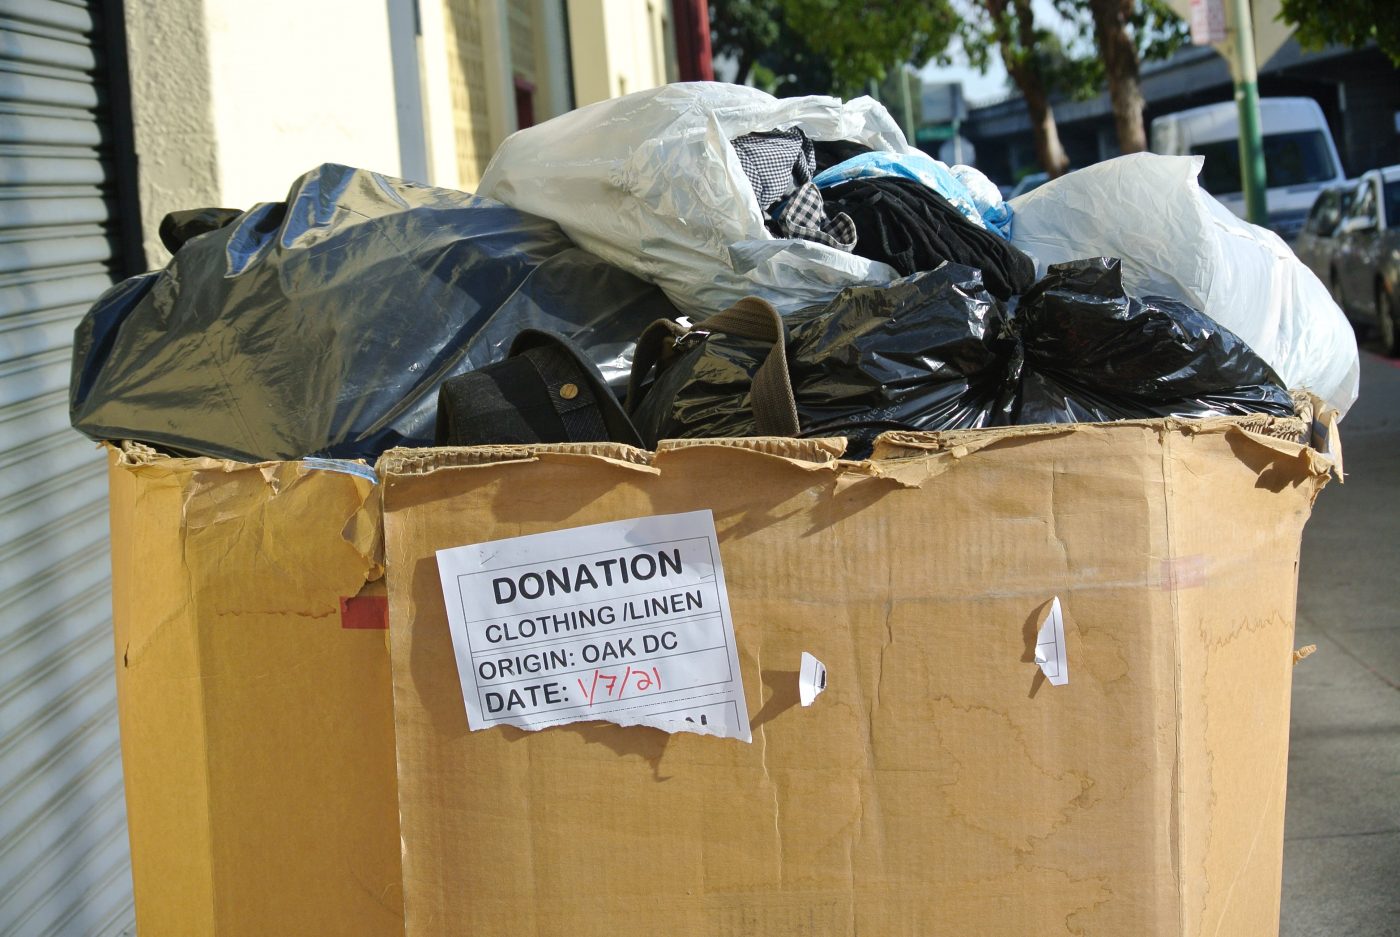 Behind The Salvation Army in Oakland Chinatown, donations wait to be sorted and stocked.